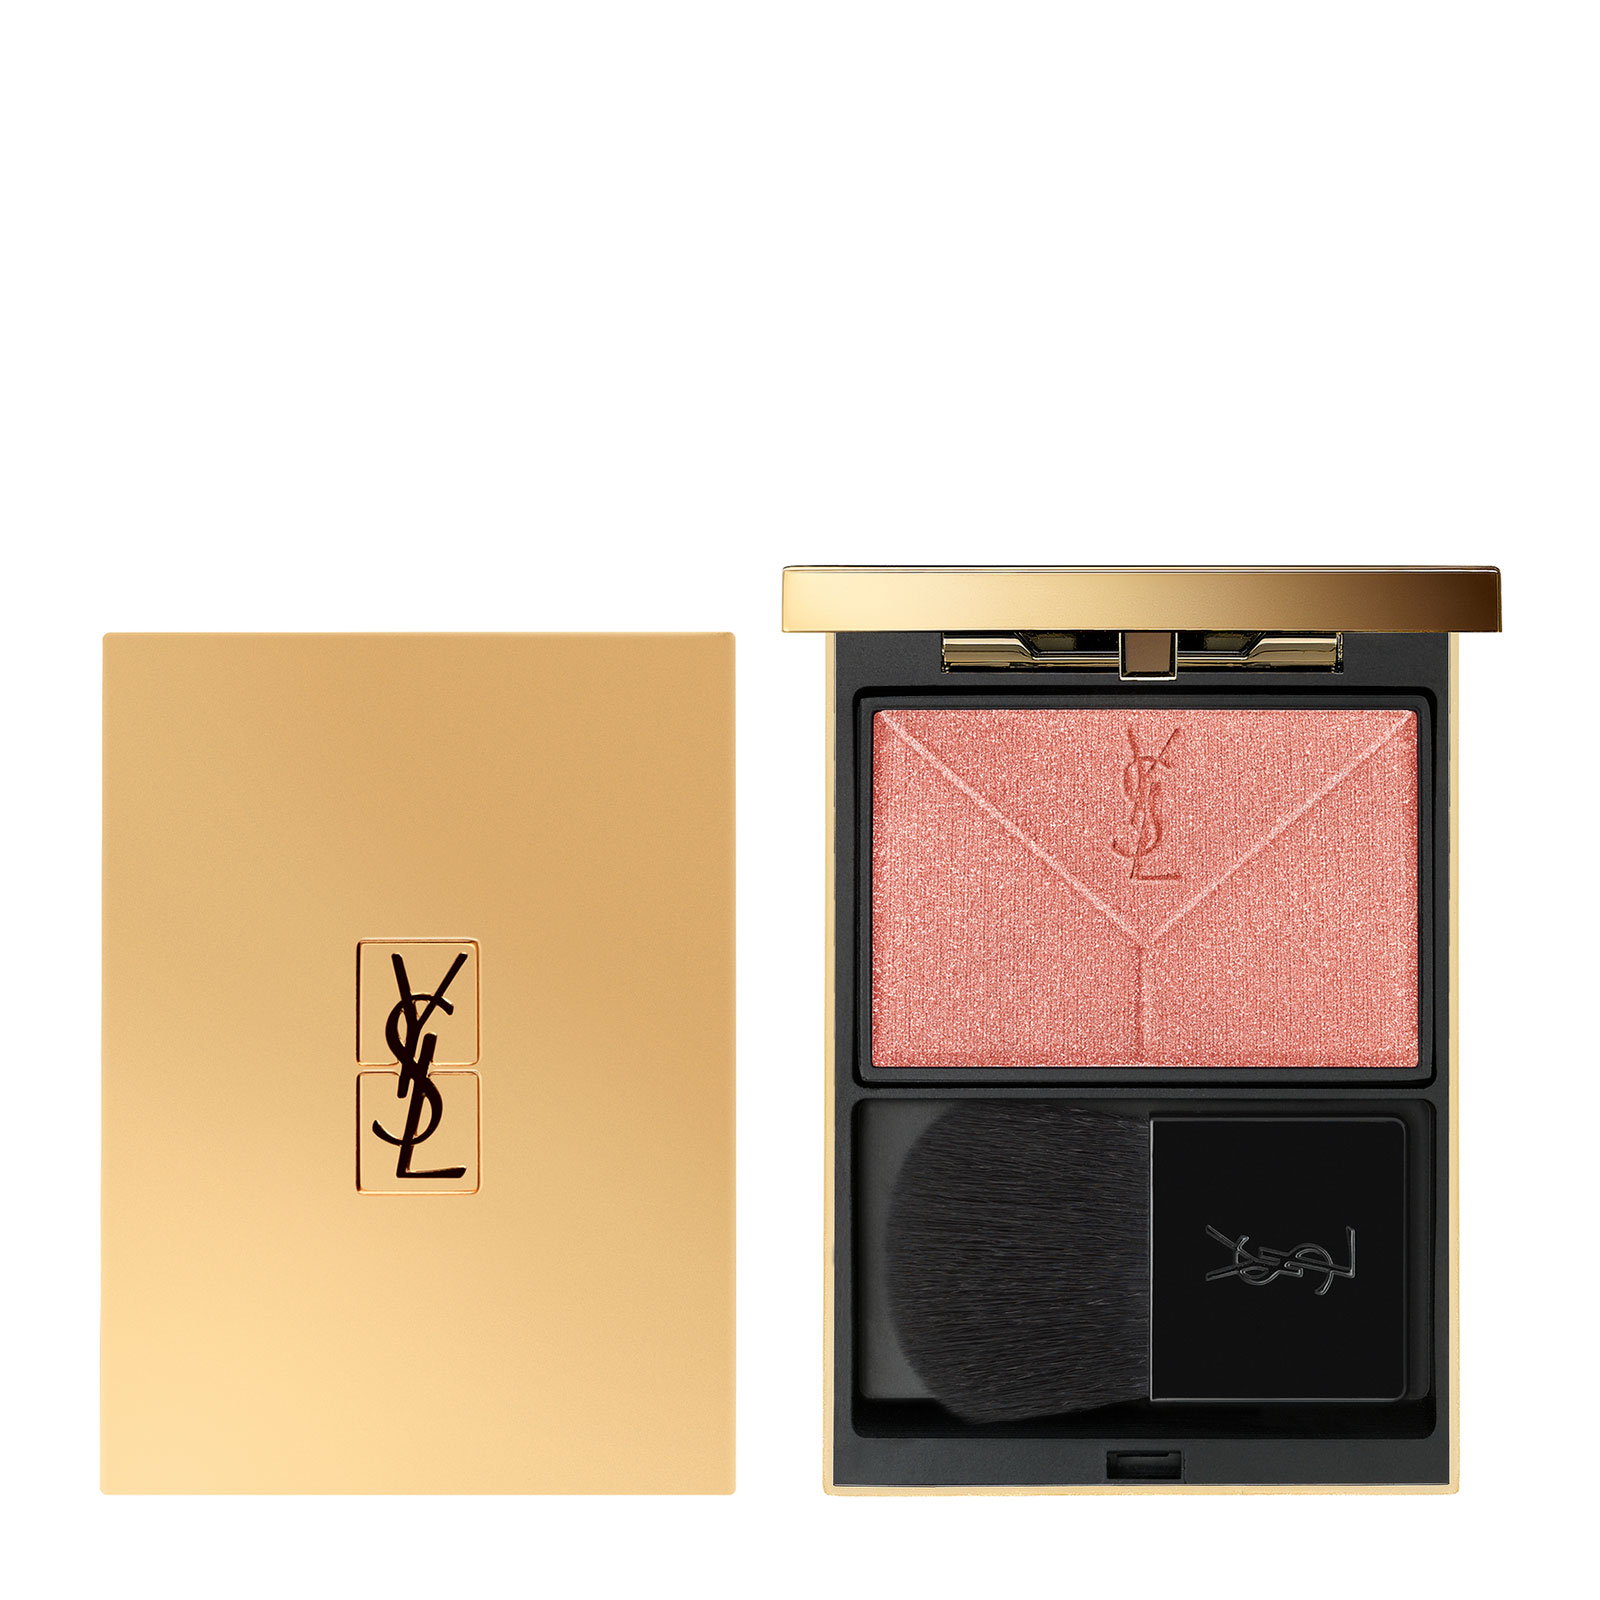 Ysl Beauty Couture Highlighter 3G N2 Or Rose